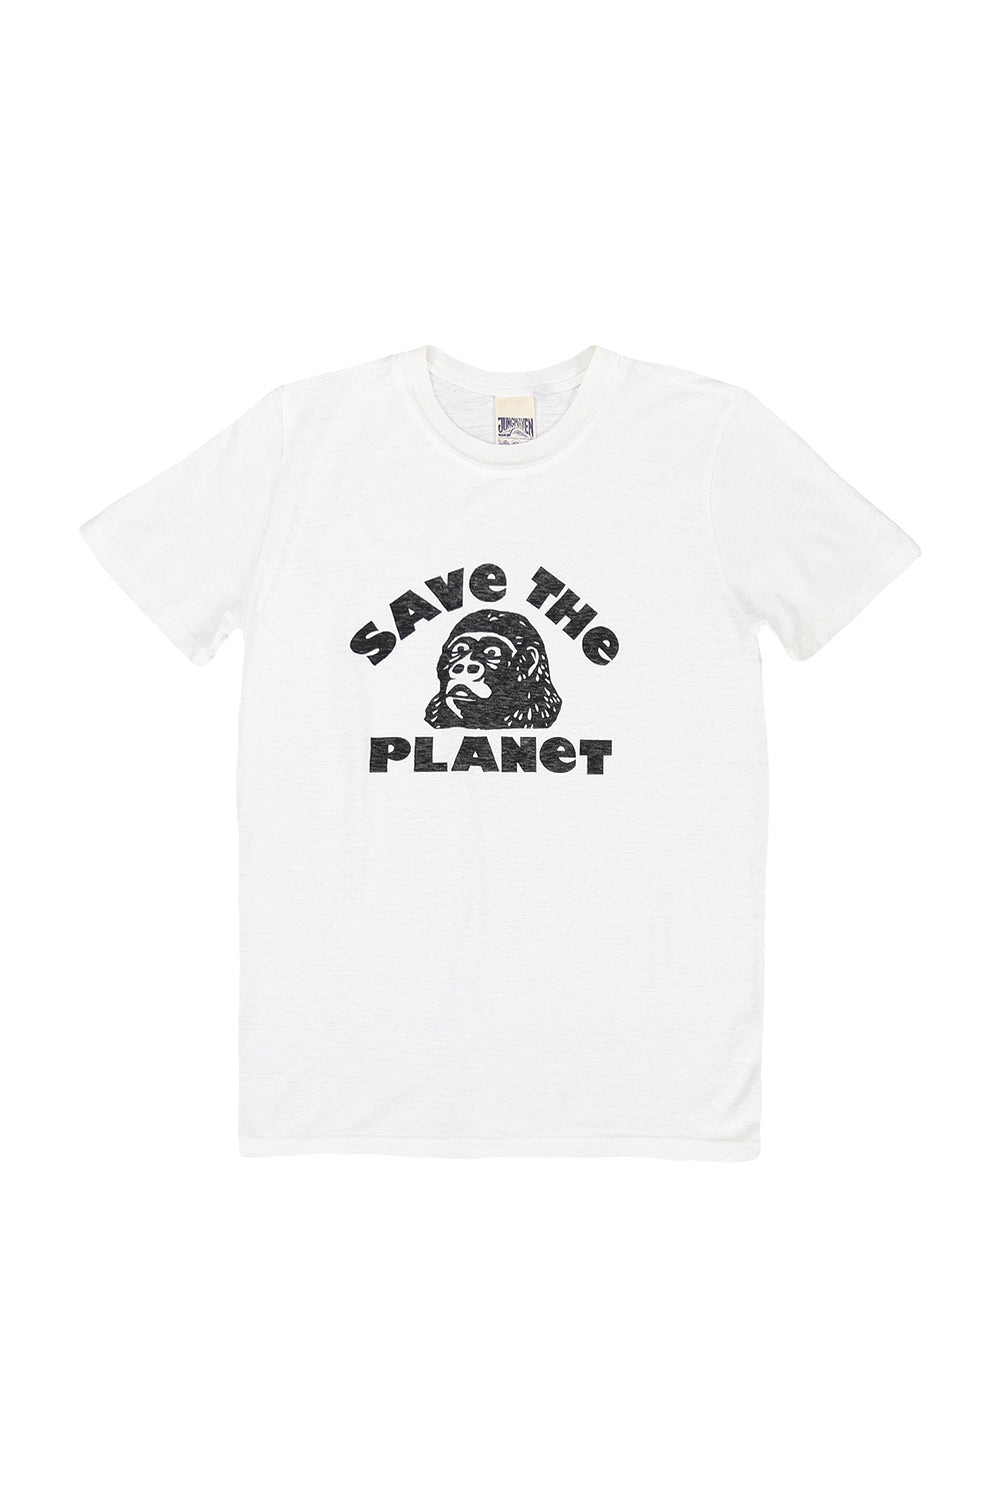 Save the Planet Grom Tee | Jungmaven Hemp Clothing & Accessories / Color: Washed White